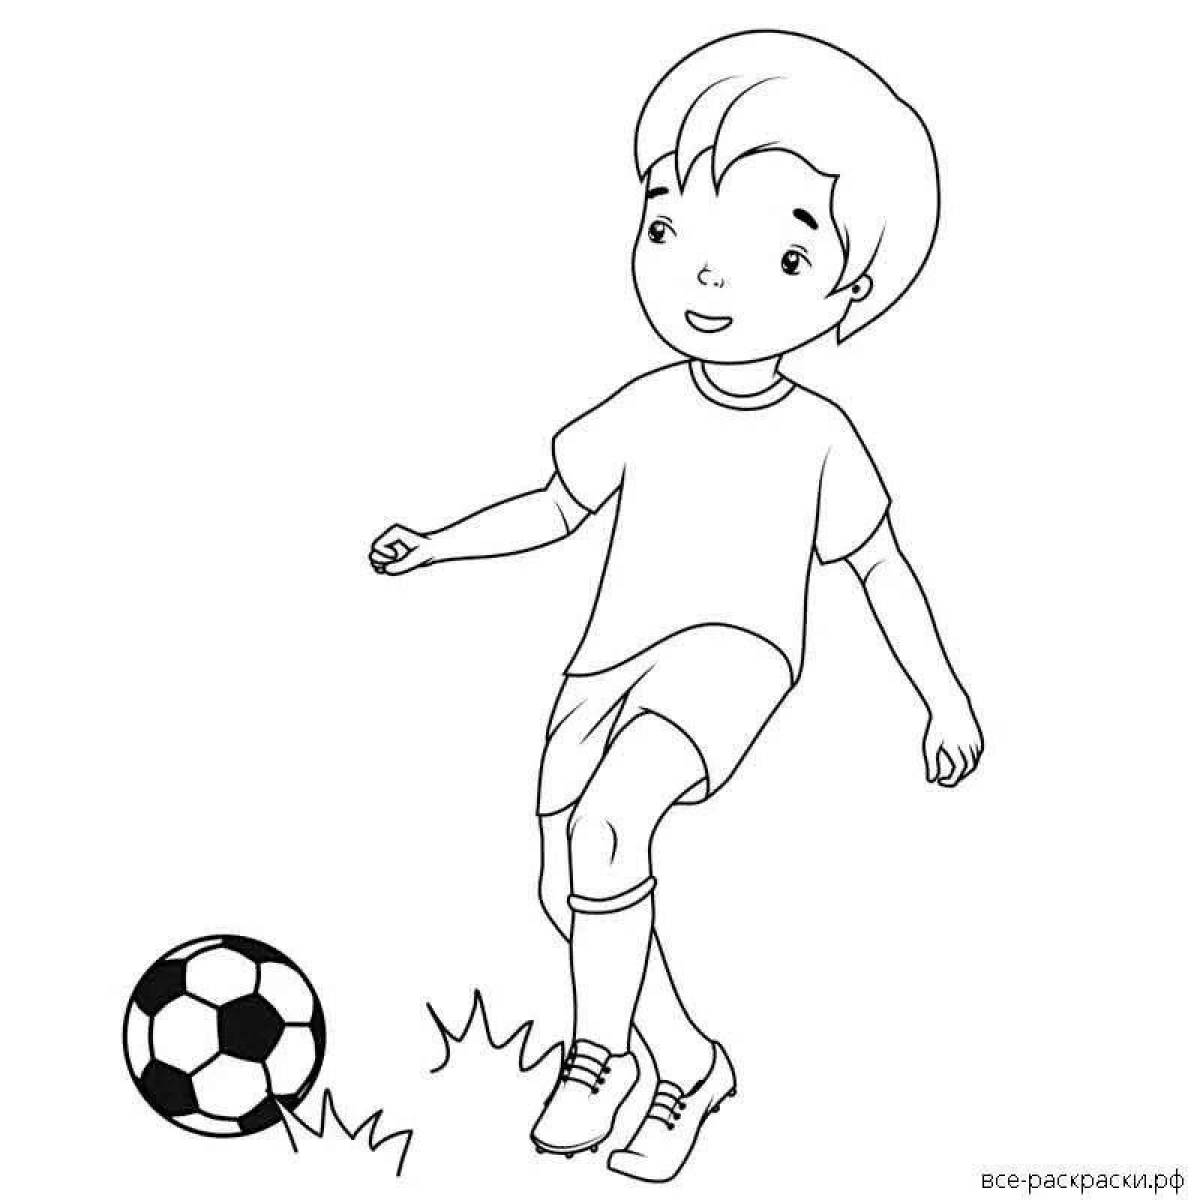 Coloring page assiduous soccer boy